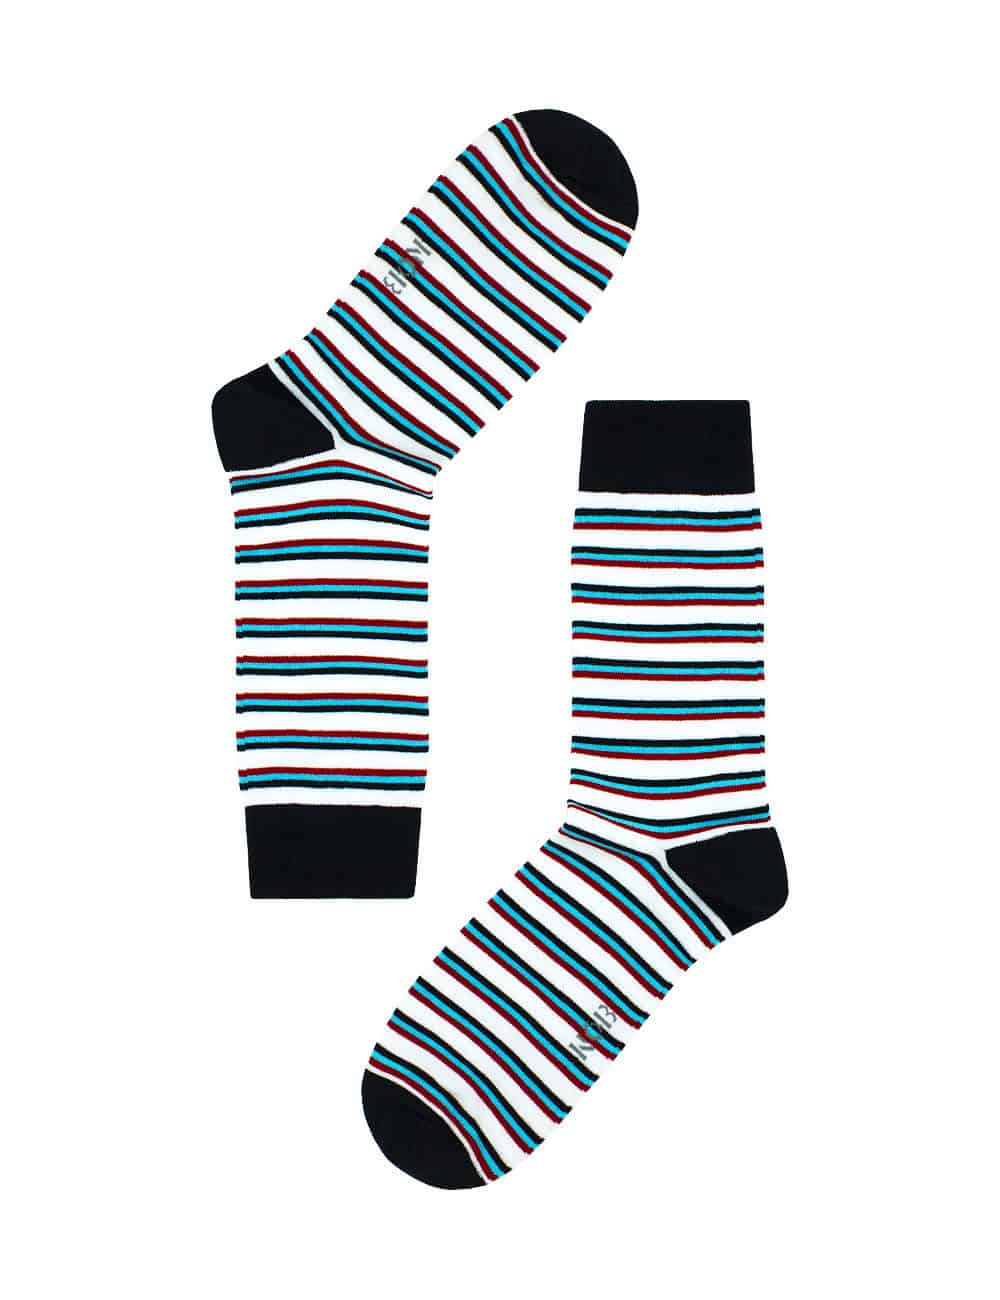 White with Navy, Turquoise and Red Stripes Crew Socks made with Premium Combed Cotton SOC4B.NOB1